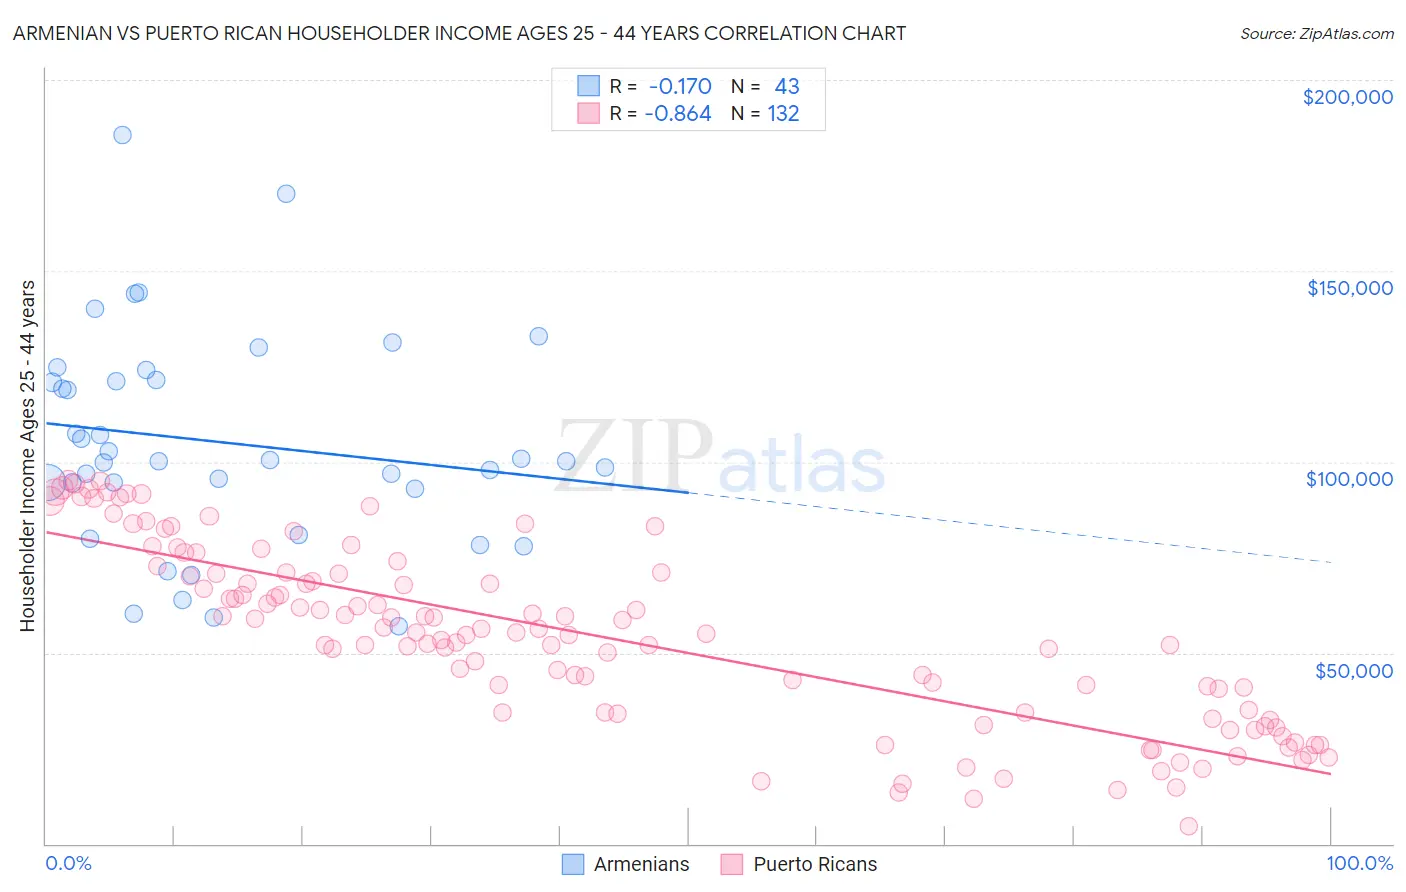 Armenian vs Puerto Rican Householder Income Ages 25 - 44 years